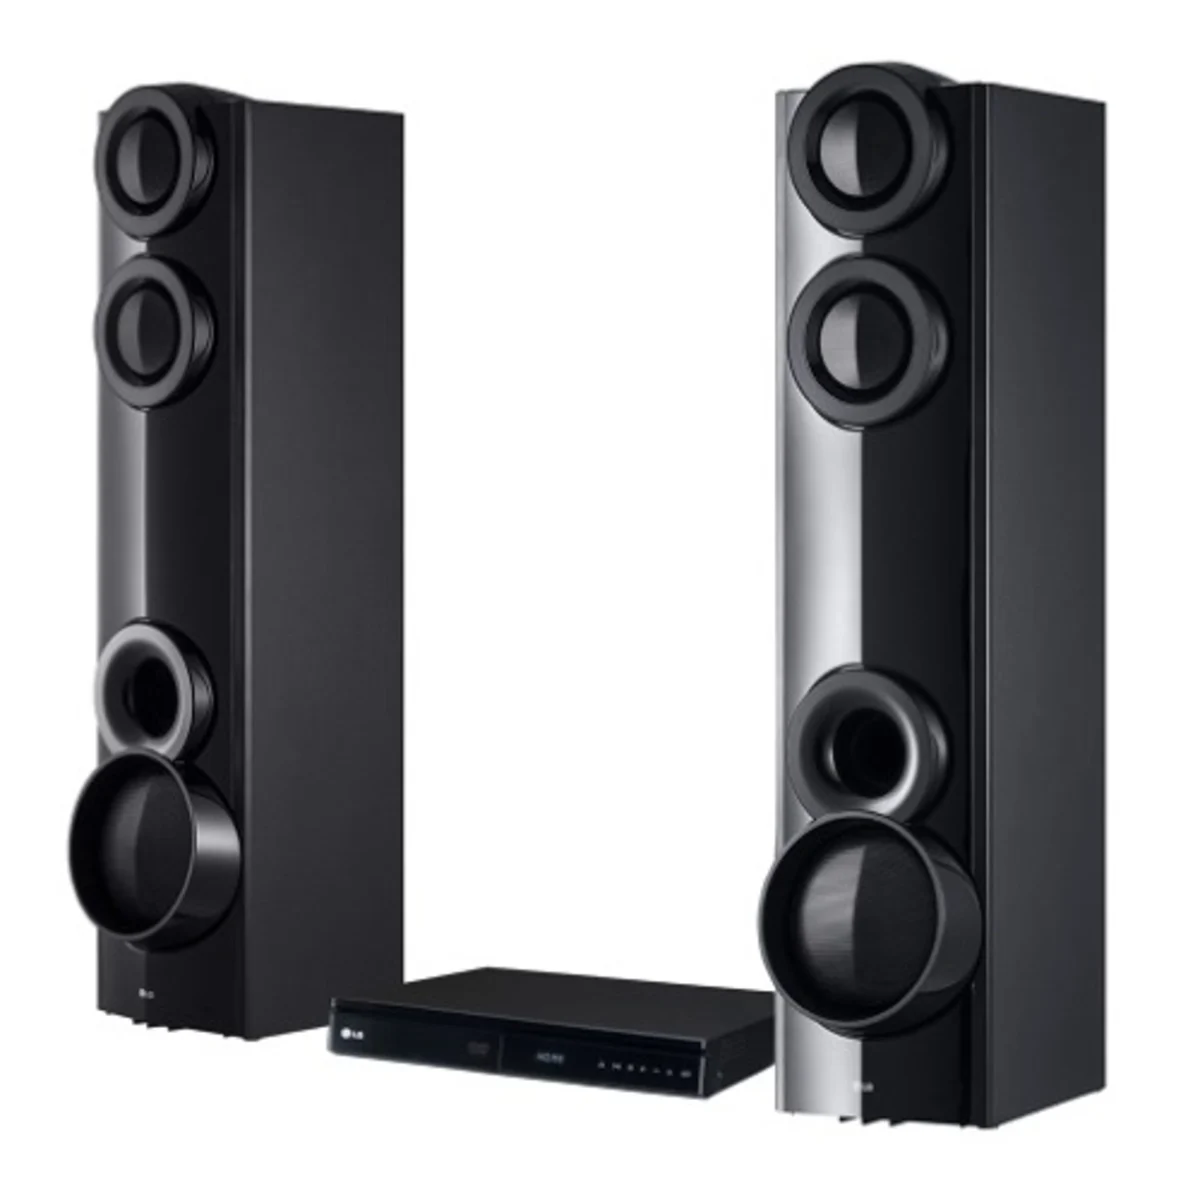 LG 5.1 Home theater